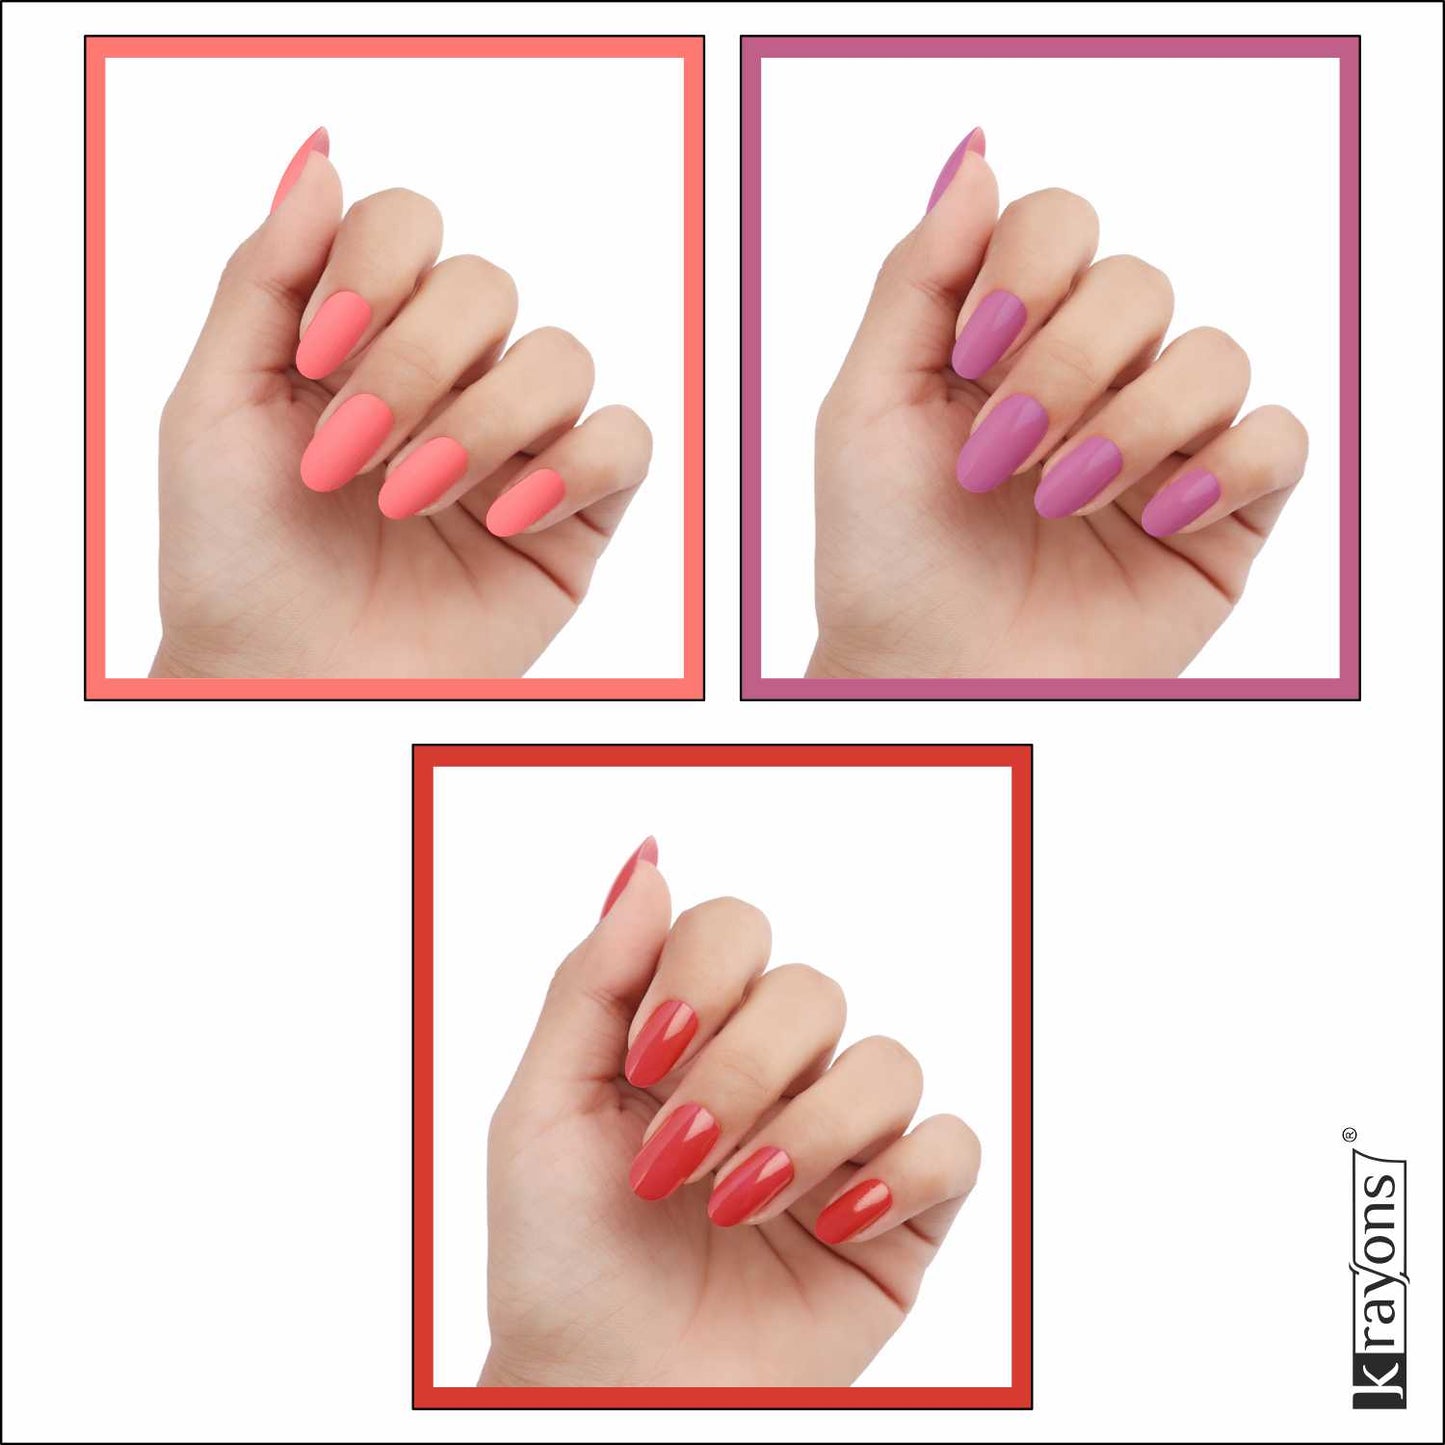 Krayons Cute Super Matte Finish Nail Enamel, Quick Dry, LongLasting, Blossom Peach, Plum Matte, Ruby Red, 6ml Each (Pack of 3)